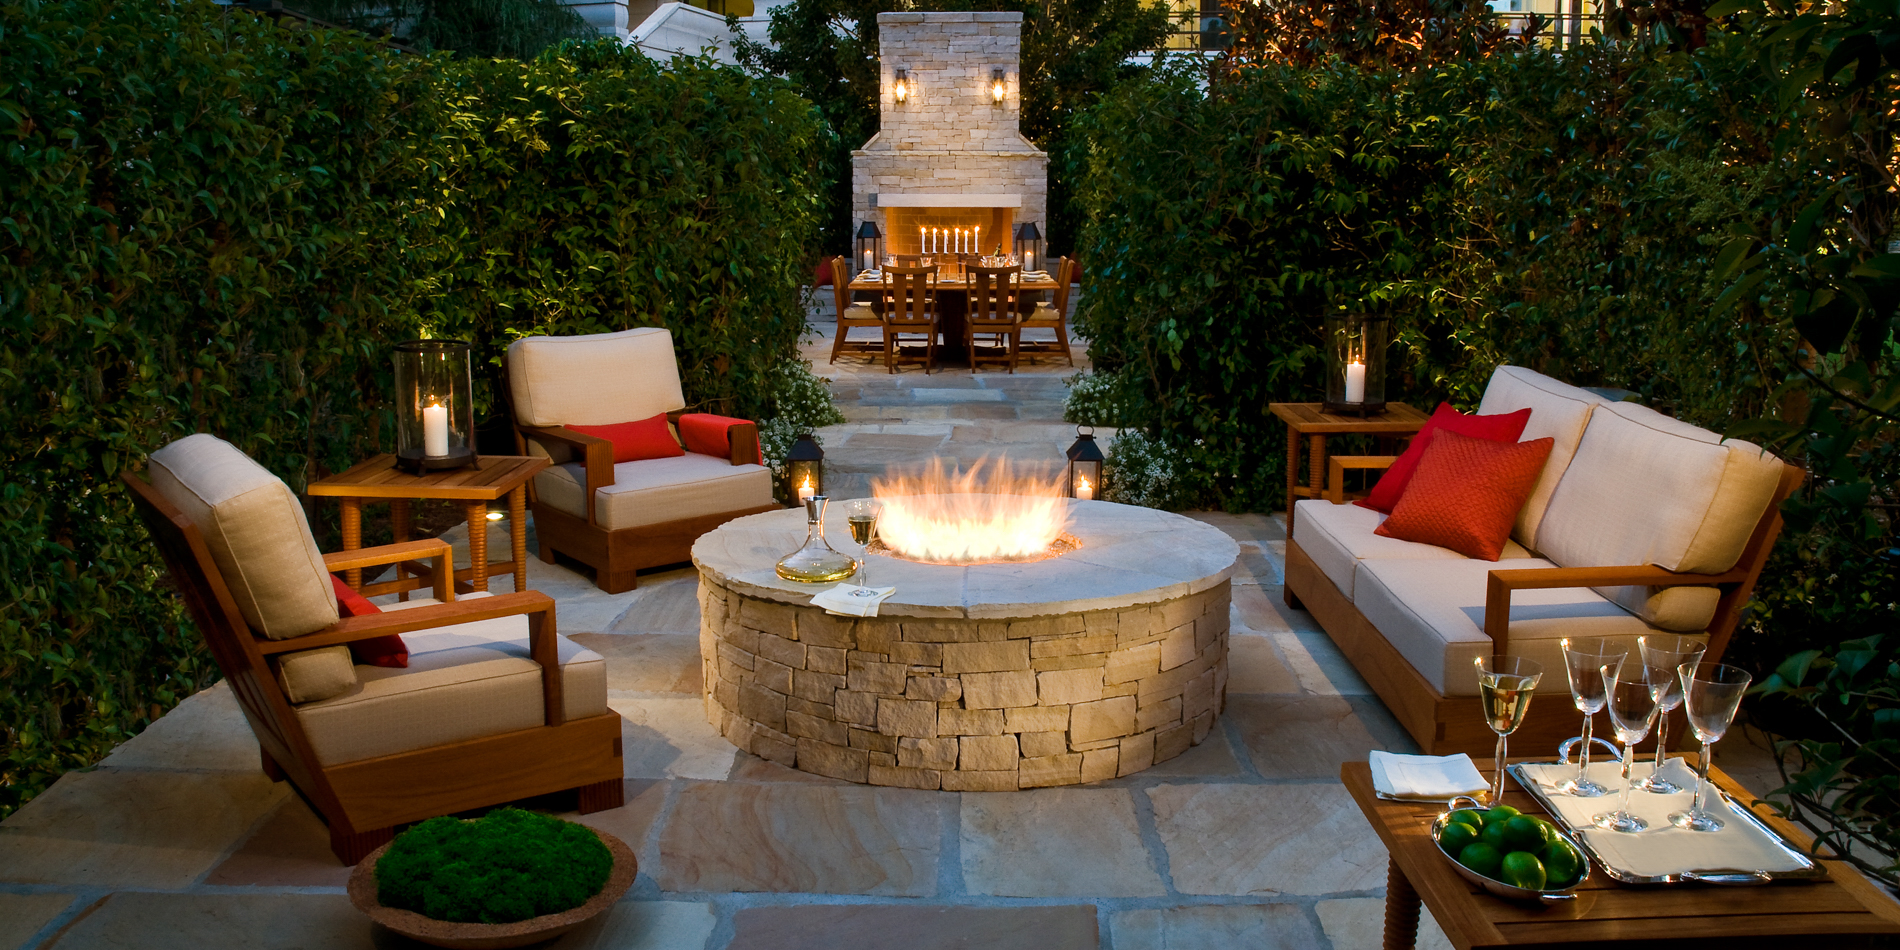 The Century fire pit